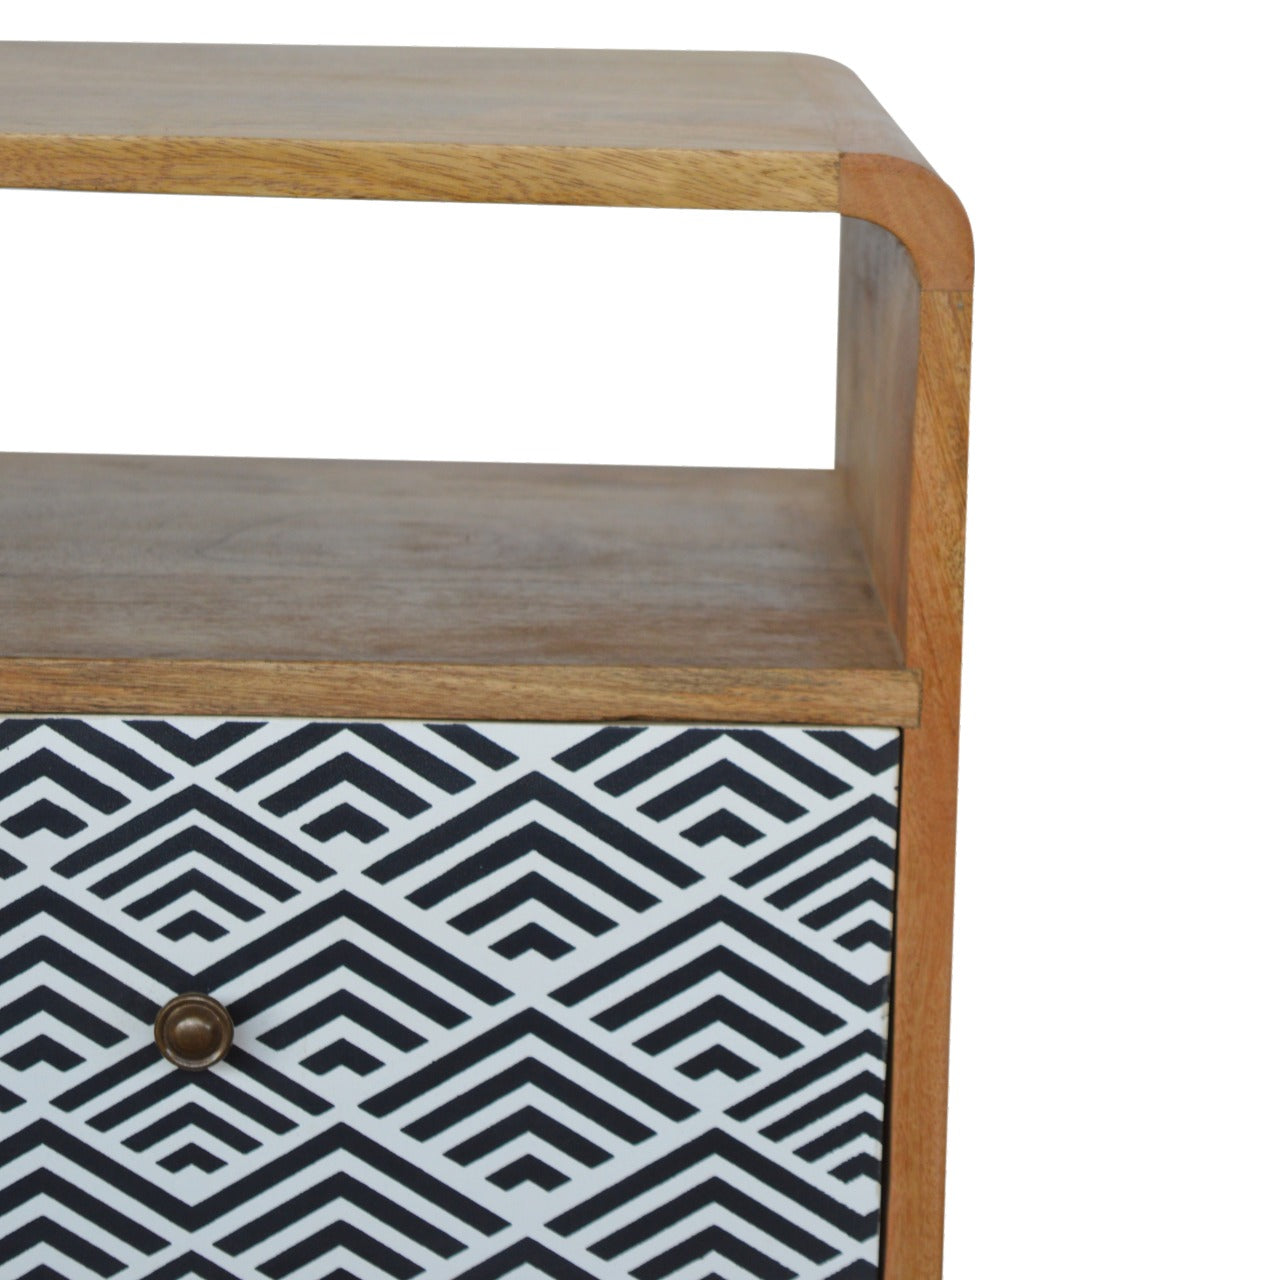 Monochrome Print Bedside Table with Open Slot